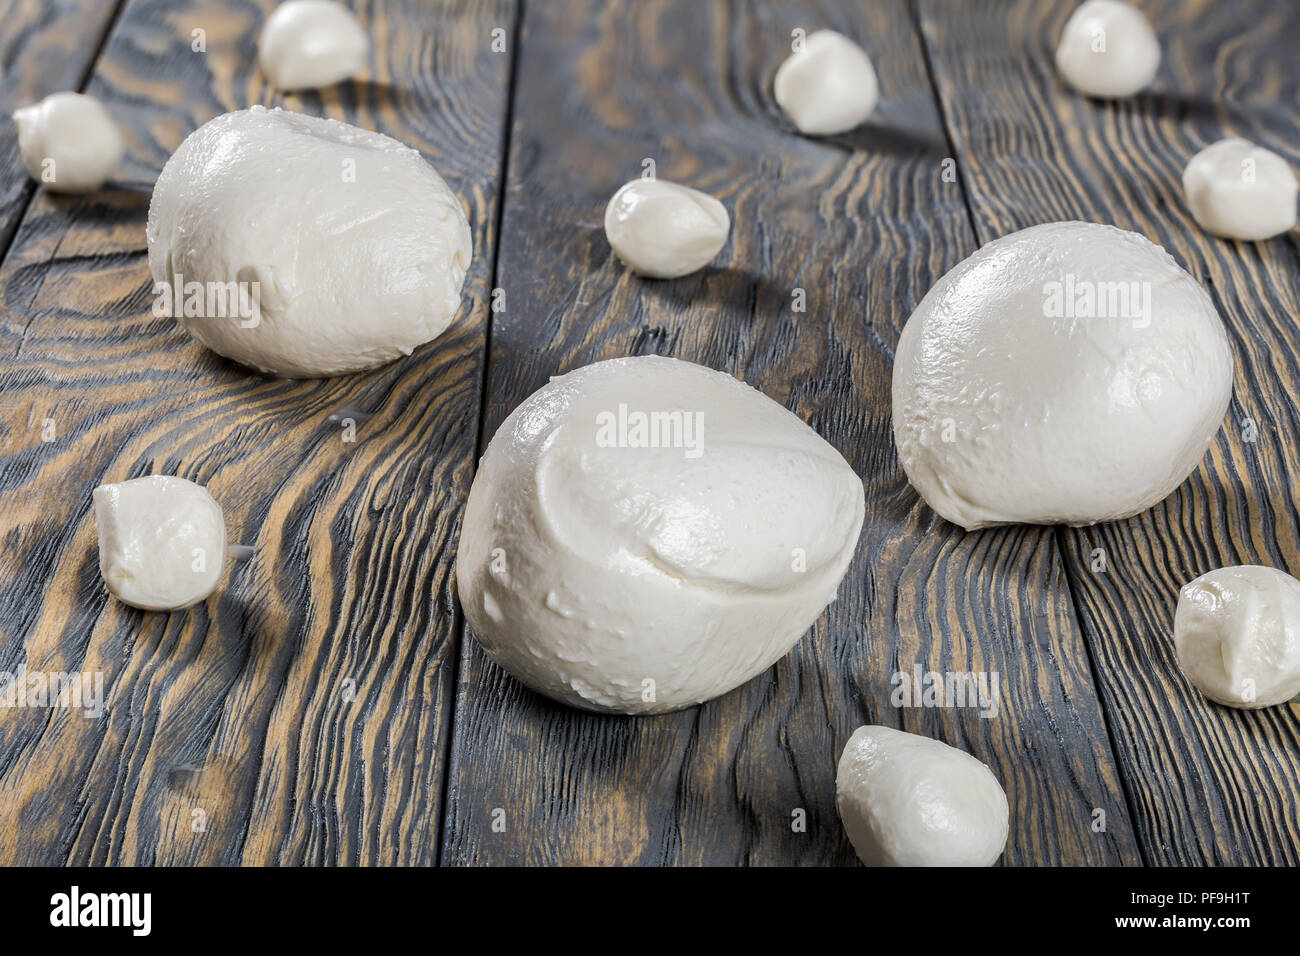 mozzarella balls on an old rustic table,  close-up Stock Photo